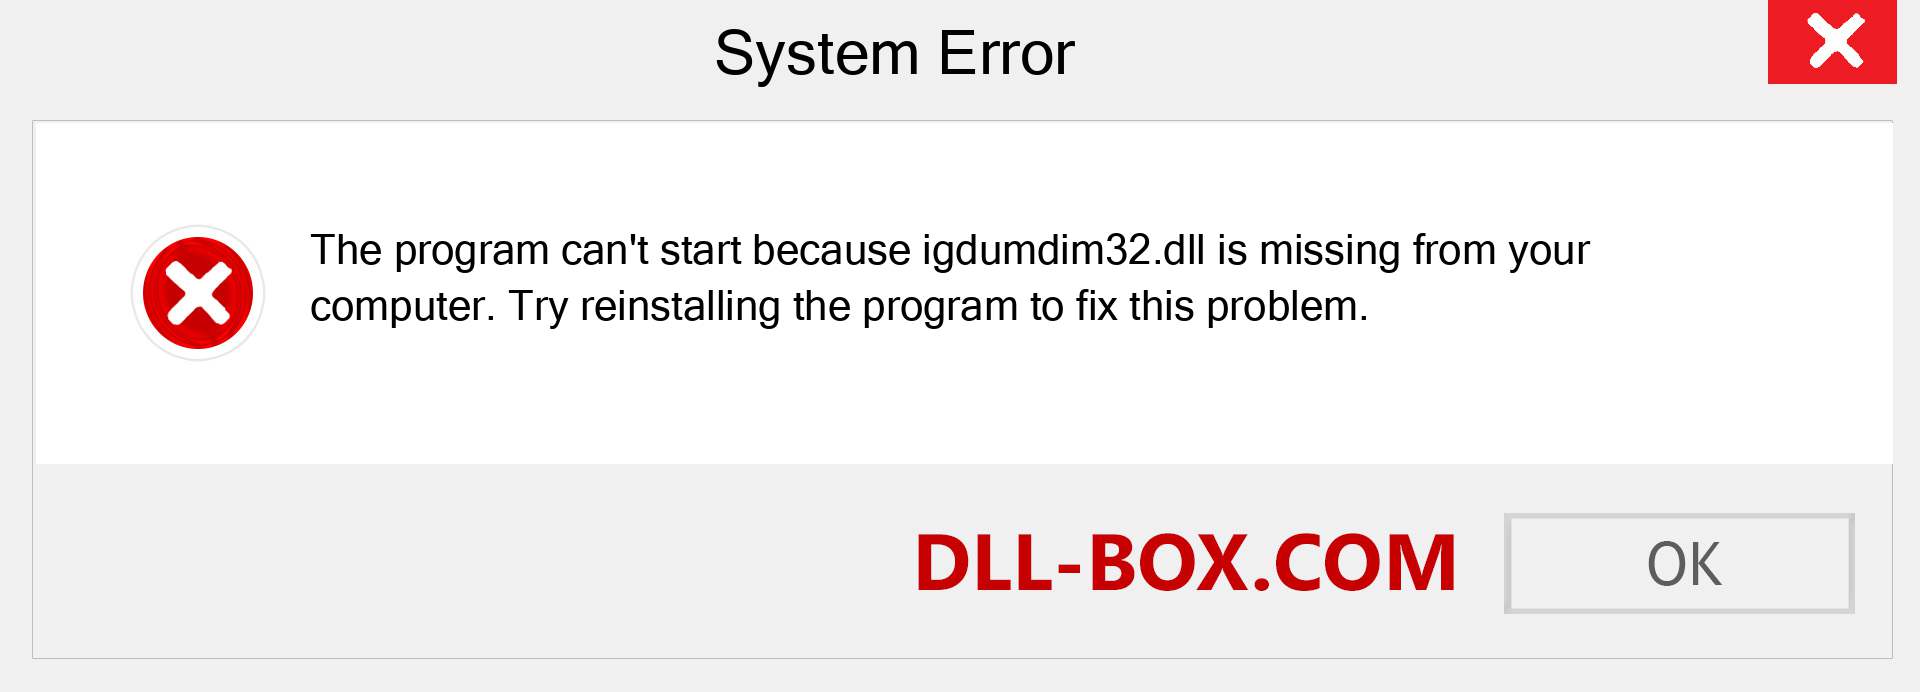  igdumdim32.dll file is missing?. Download for Windows 7, 8, 10 - Fix  igdumdim32 dll Missing Error on Windows, photos, images